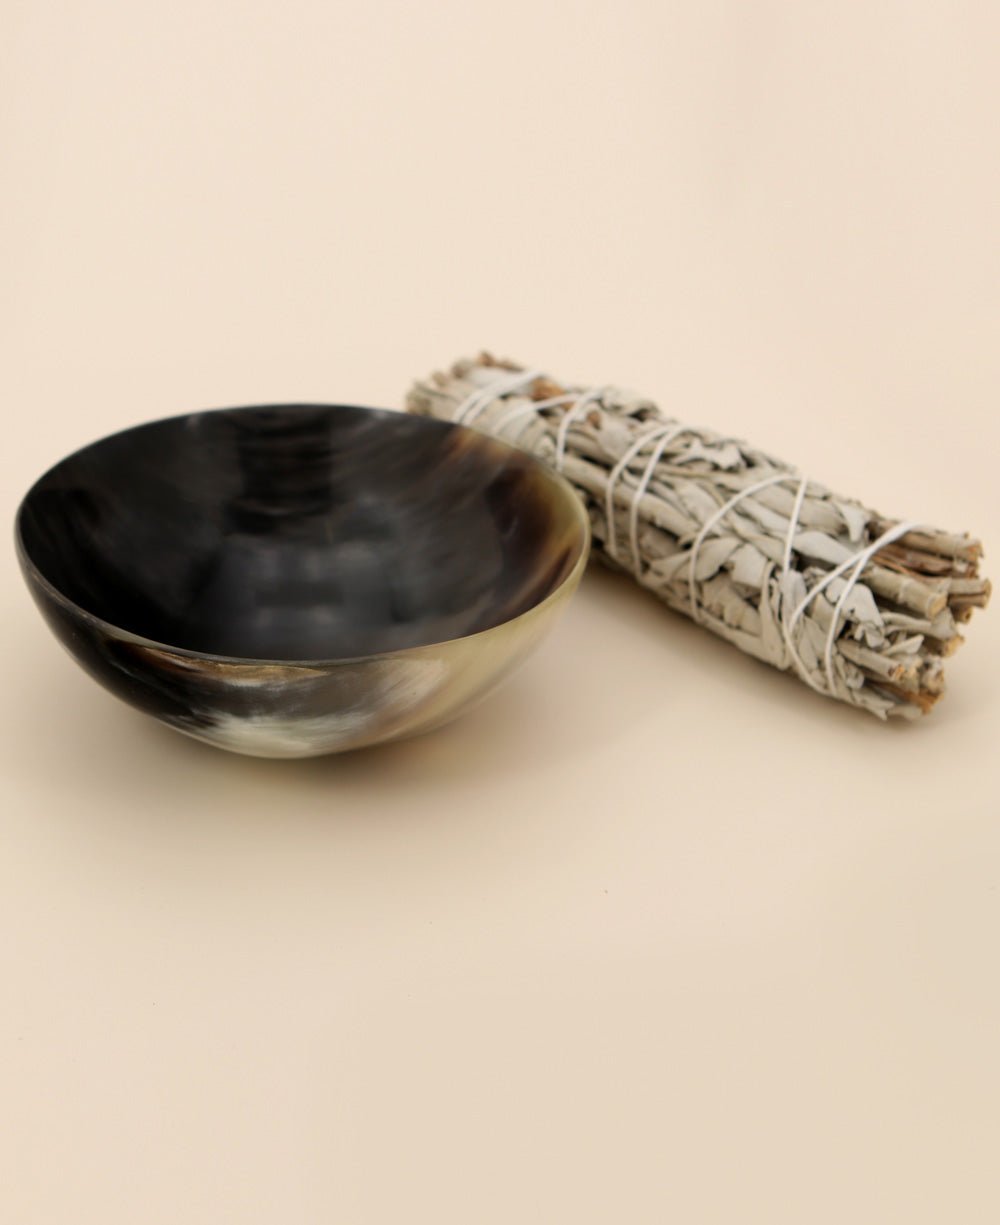 Ritual Bowl for Incense and Smudging With White Sage Bundle - Decorative Bowls